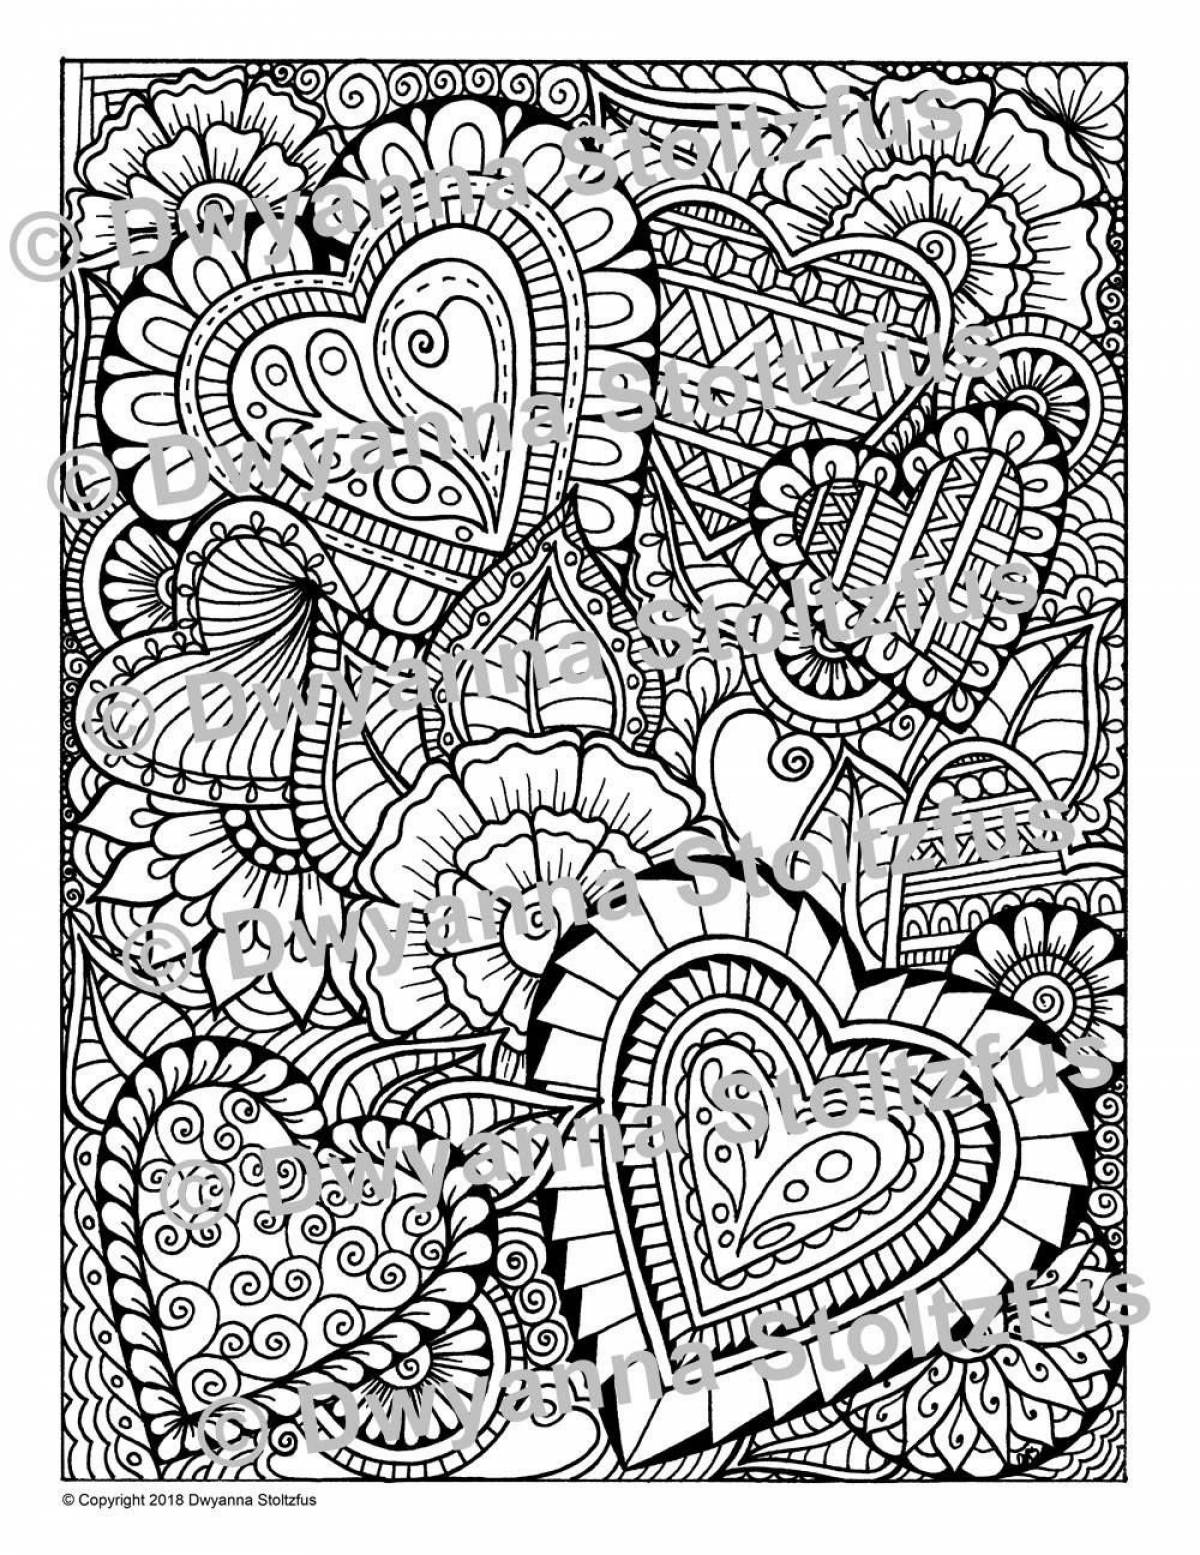 Awesome patterned coloring book